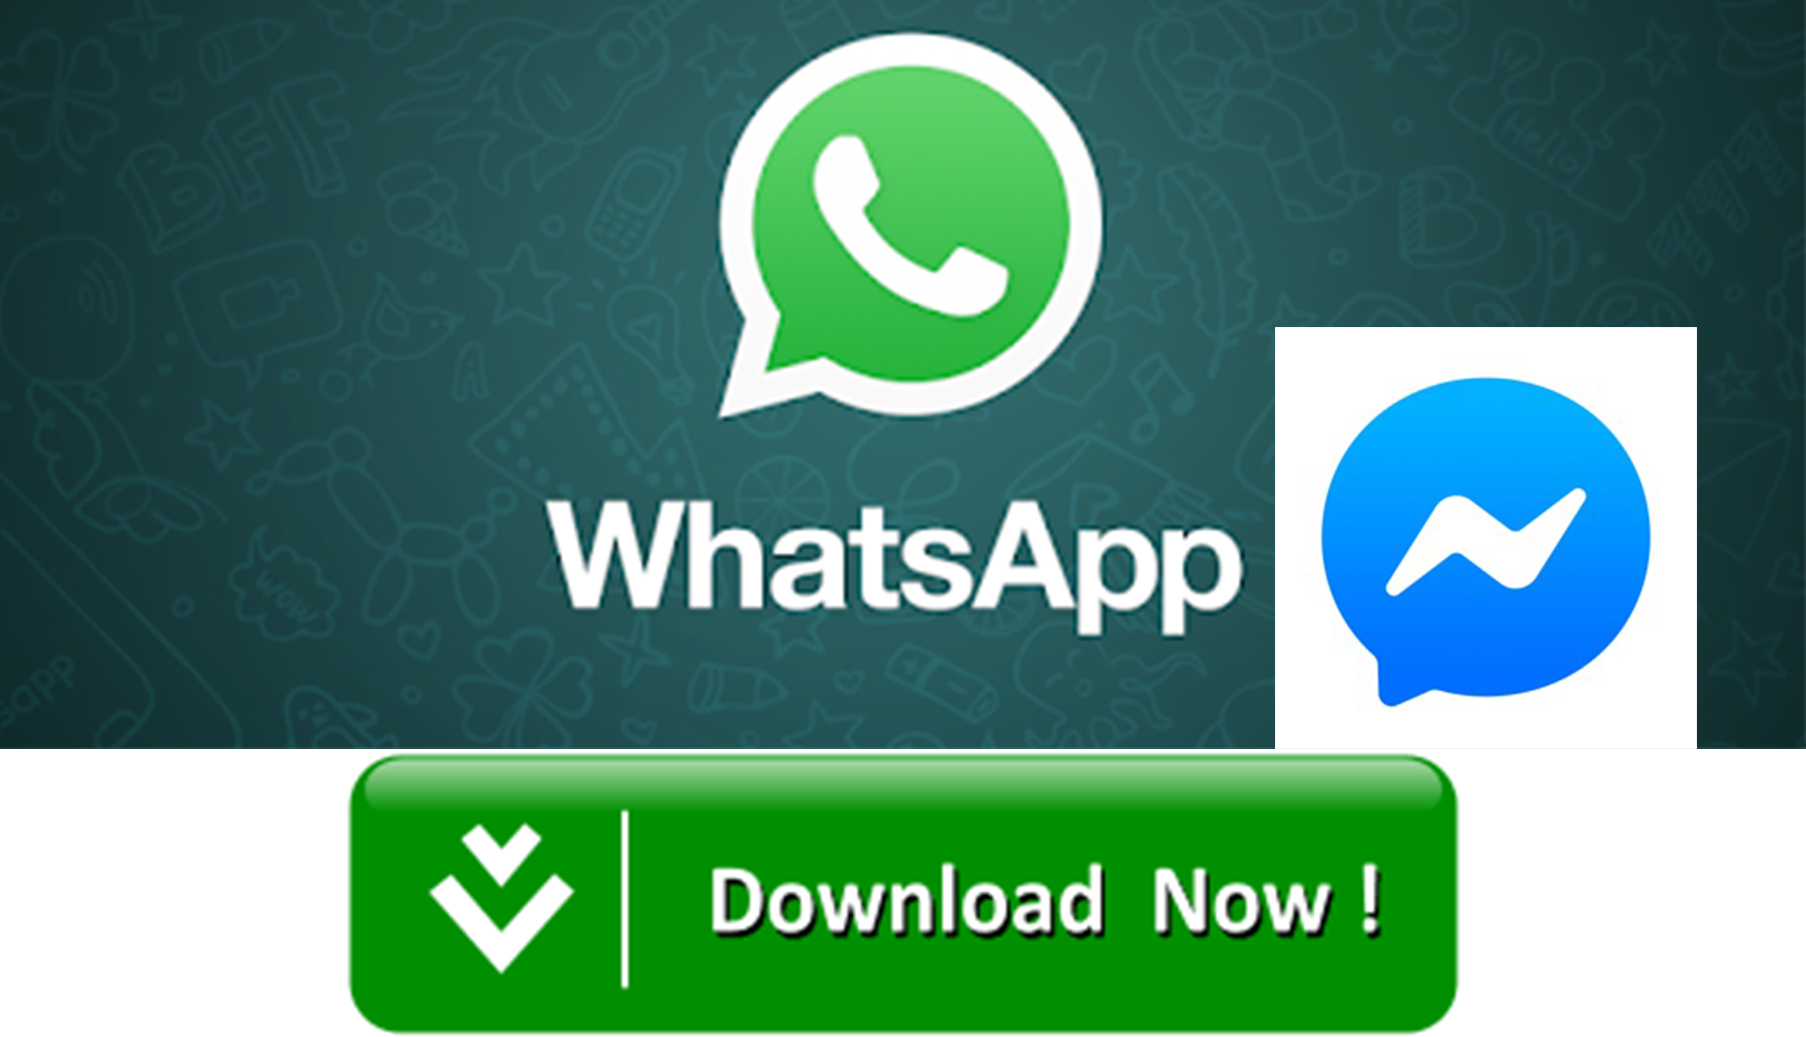 whatsapp business pc download